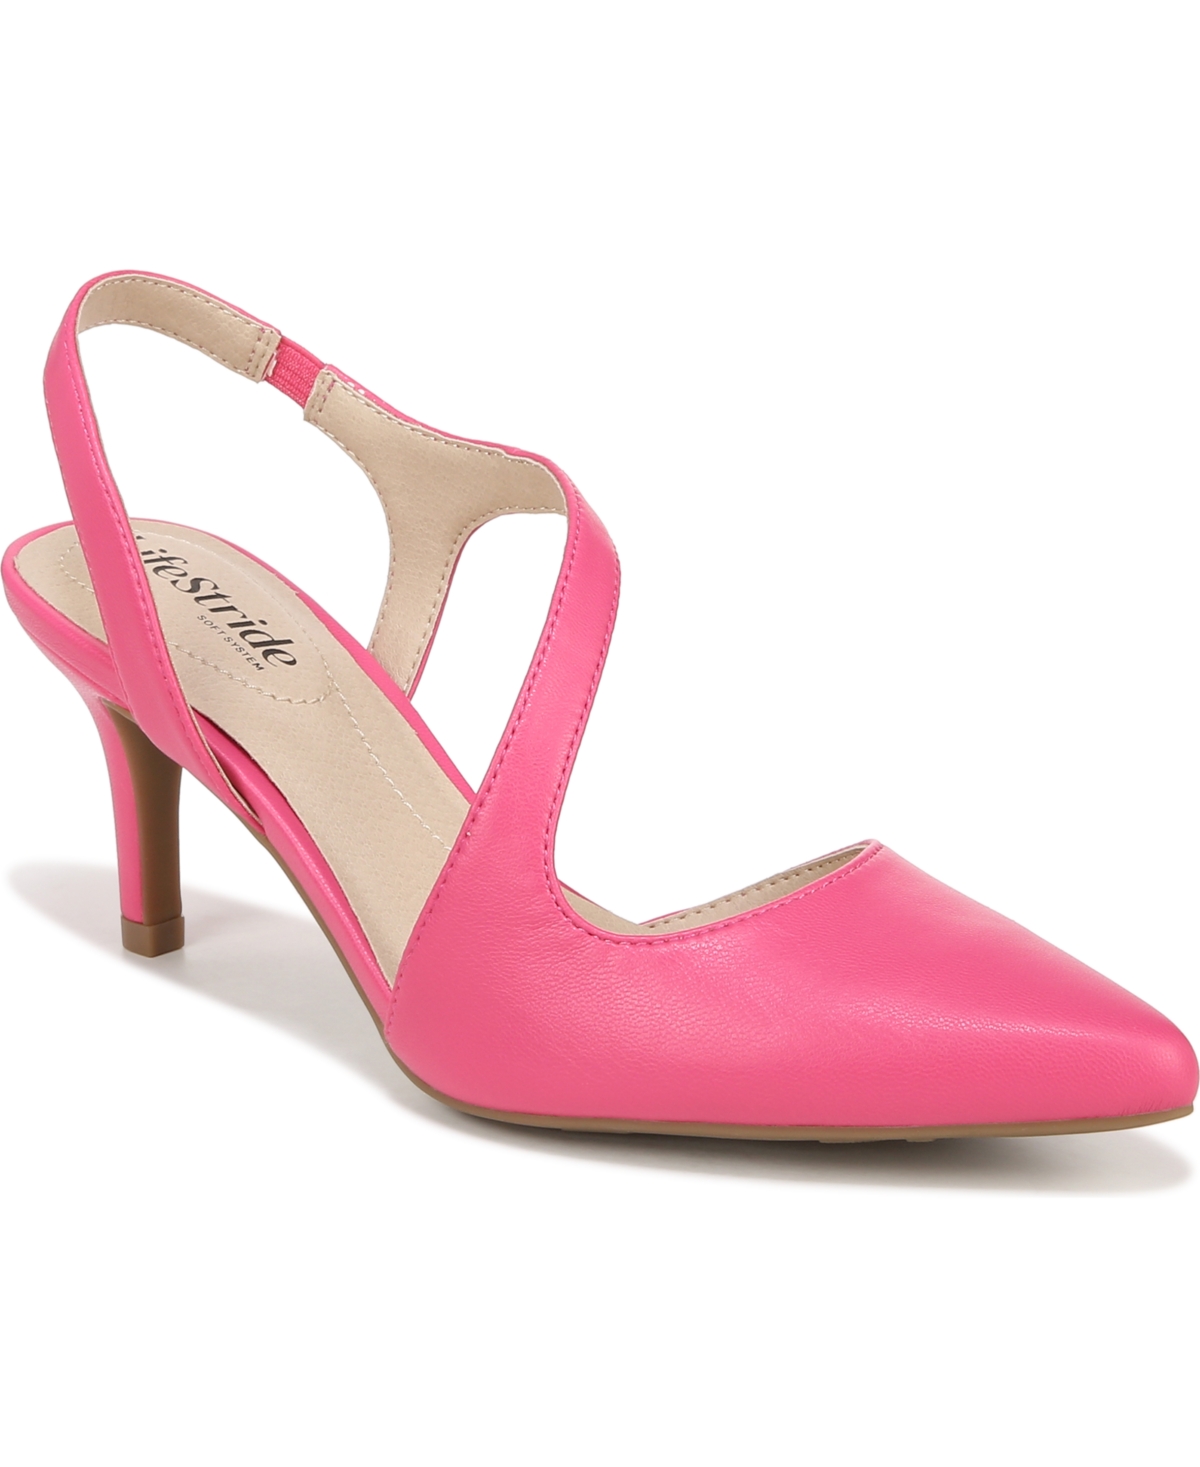 Lifestride Santorini Slingback Pumps In French Pink Faux Leather